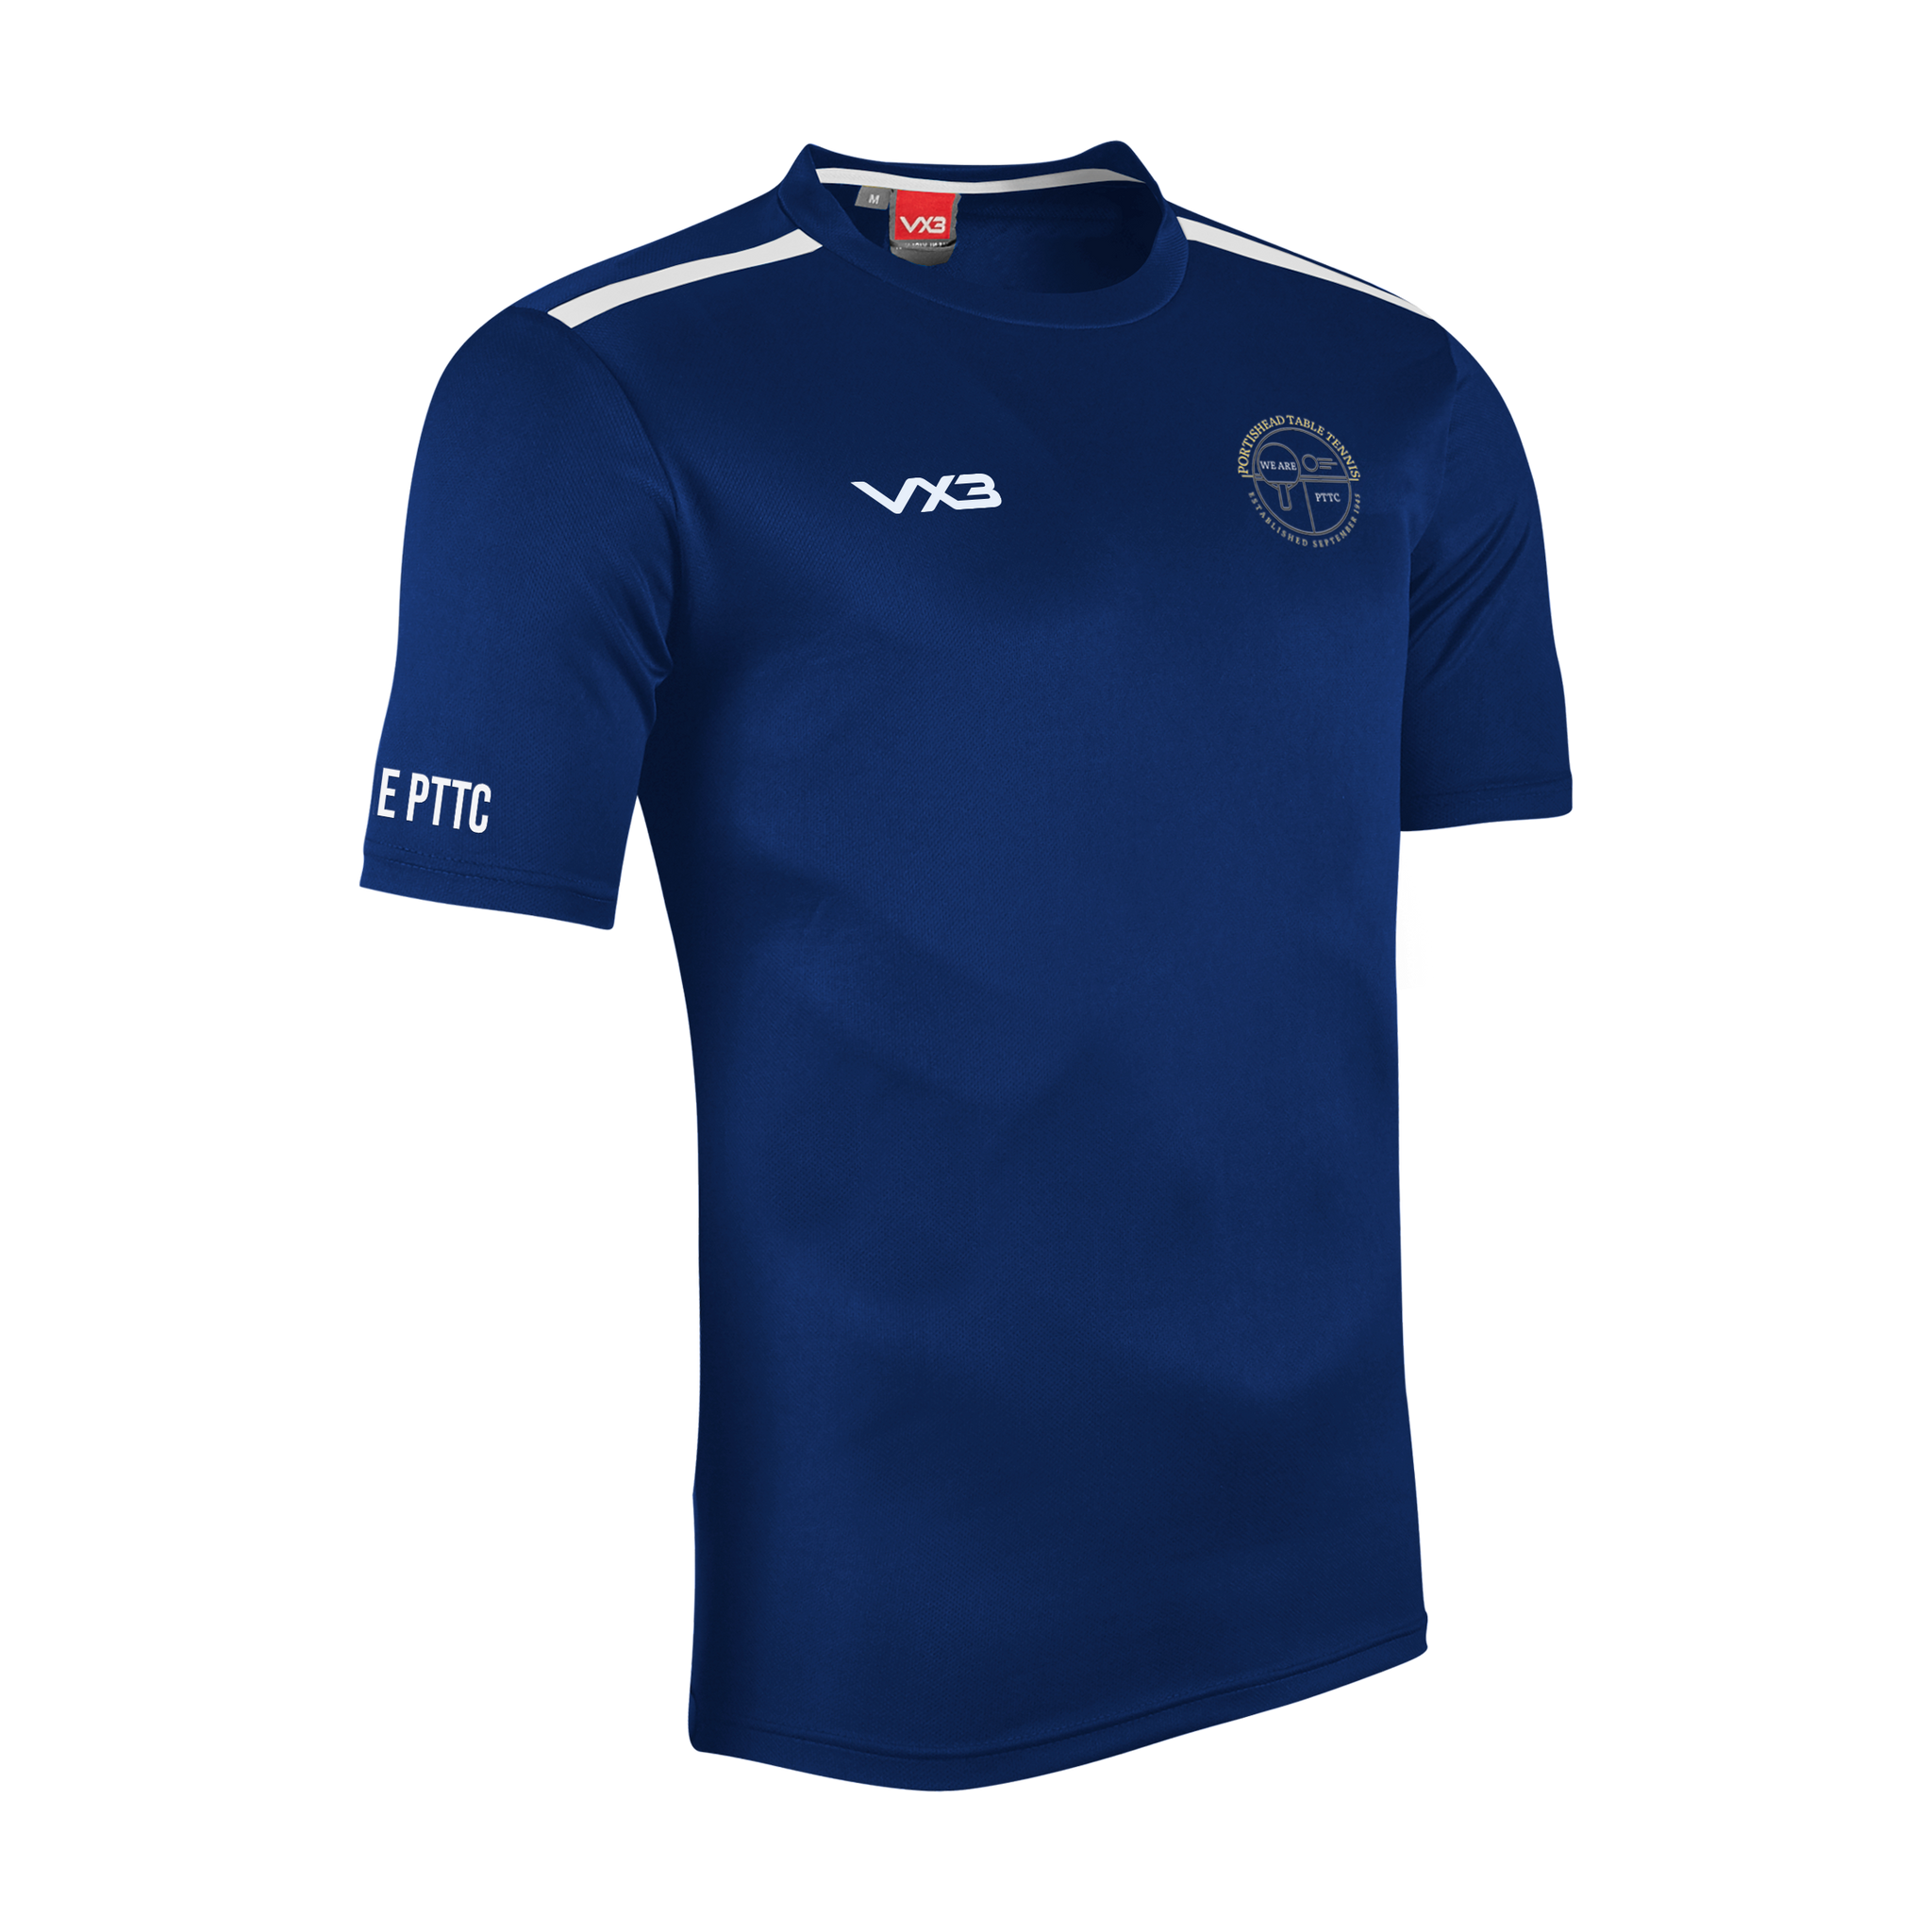 Portishead Table Tennis Club Youth Fortis Tee Navy